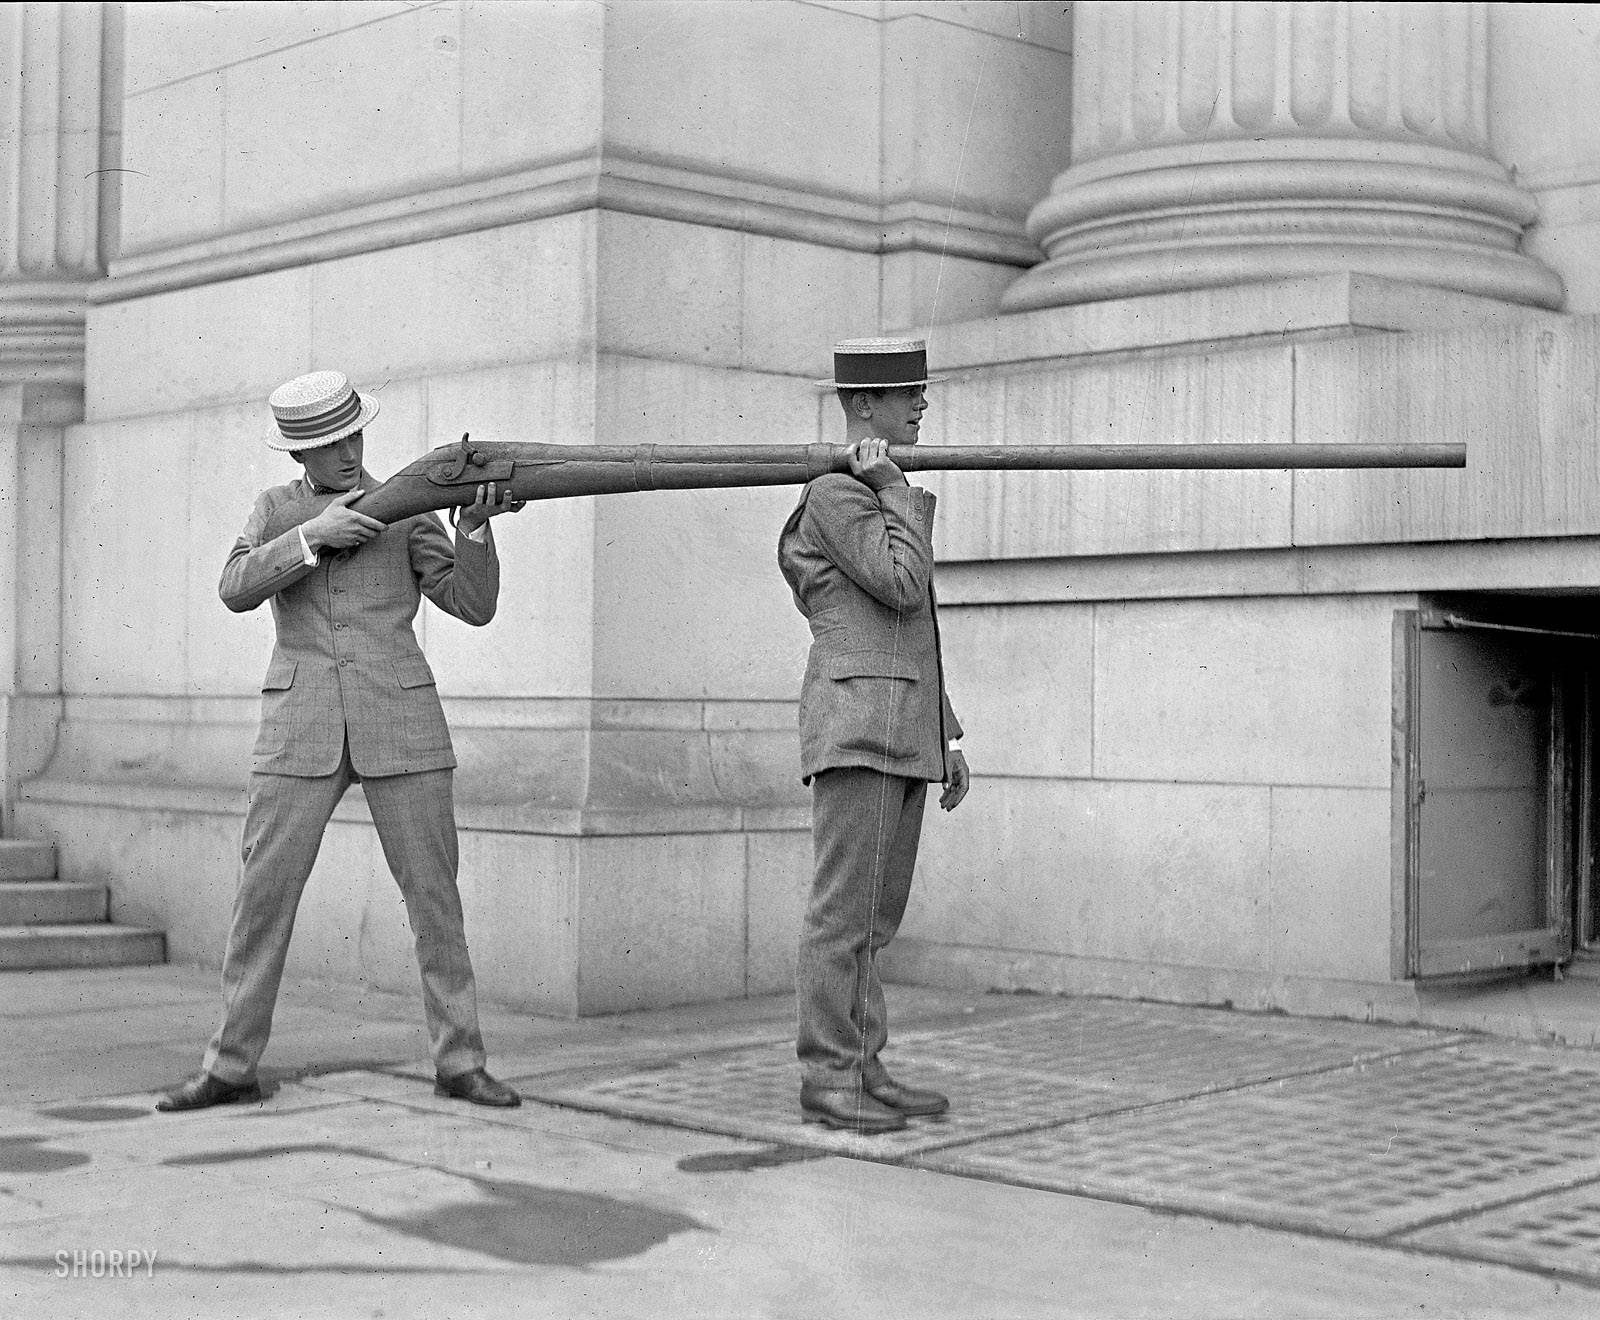 A+Punt+Gun,+used+for+duck+hunting+but+were+banned+because+they+depleted+stocks+of+wild+fowl.jpg